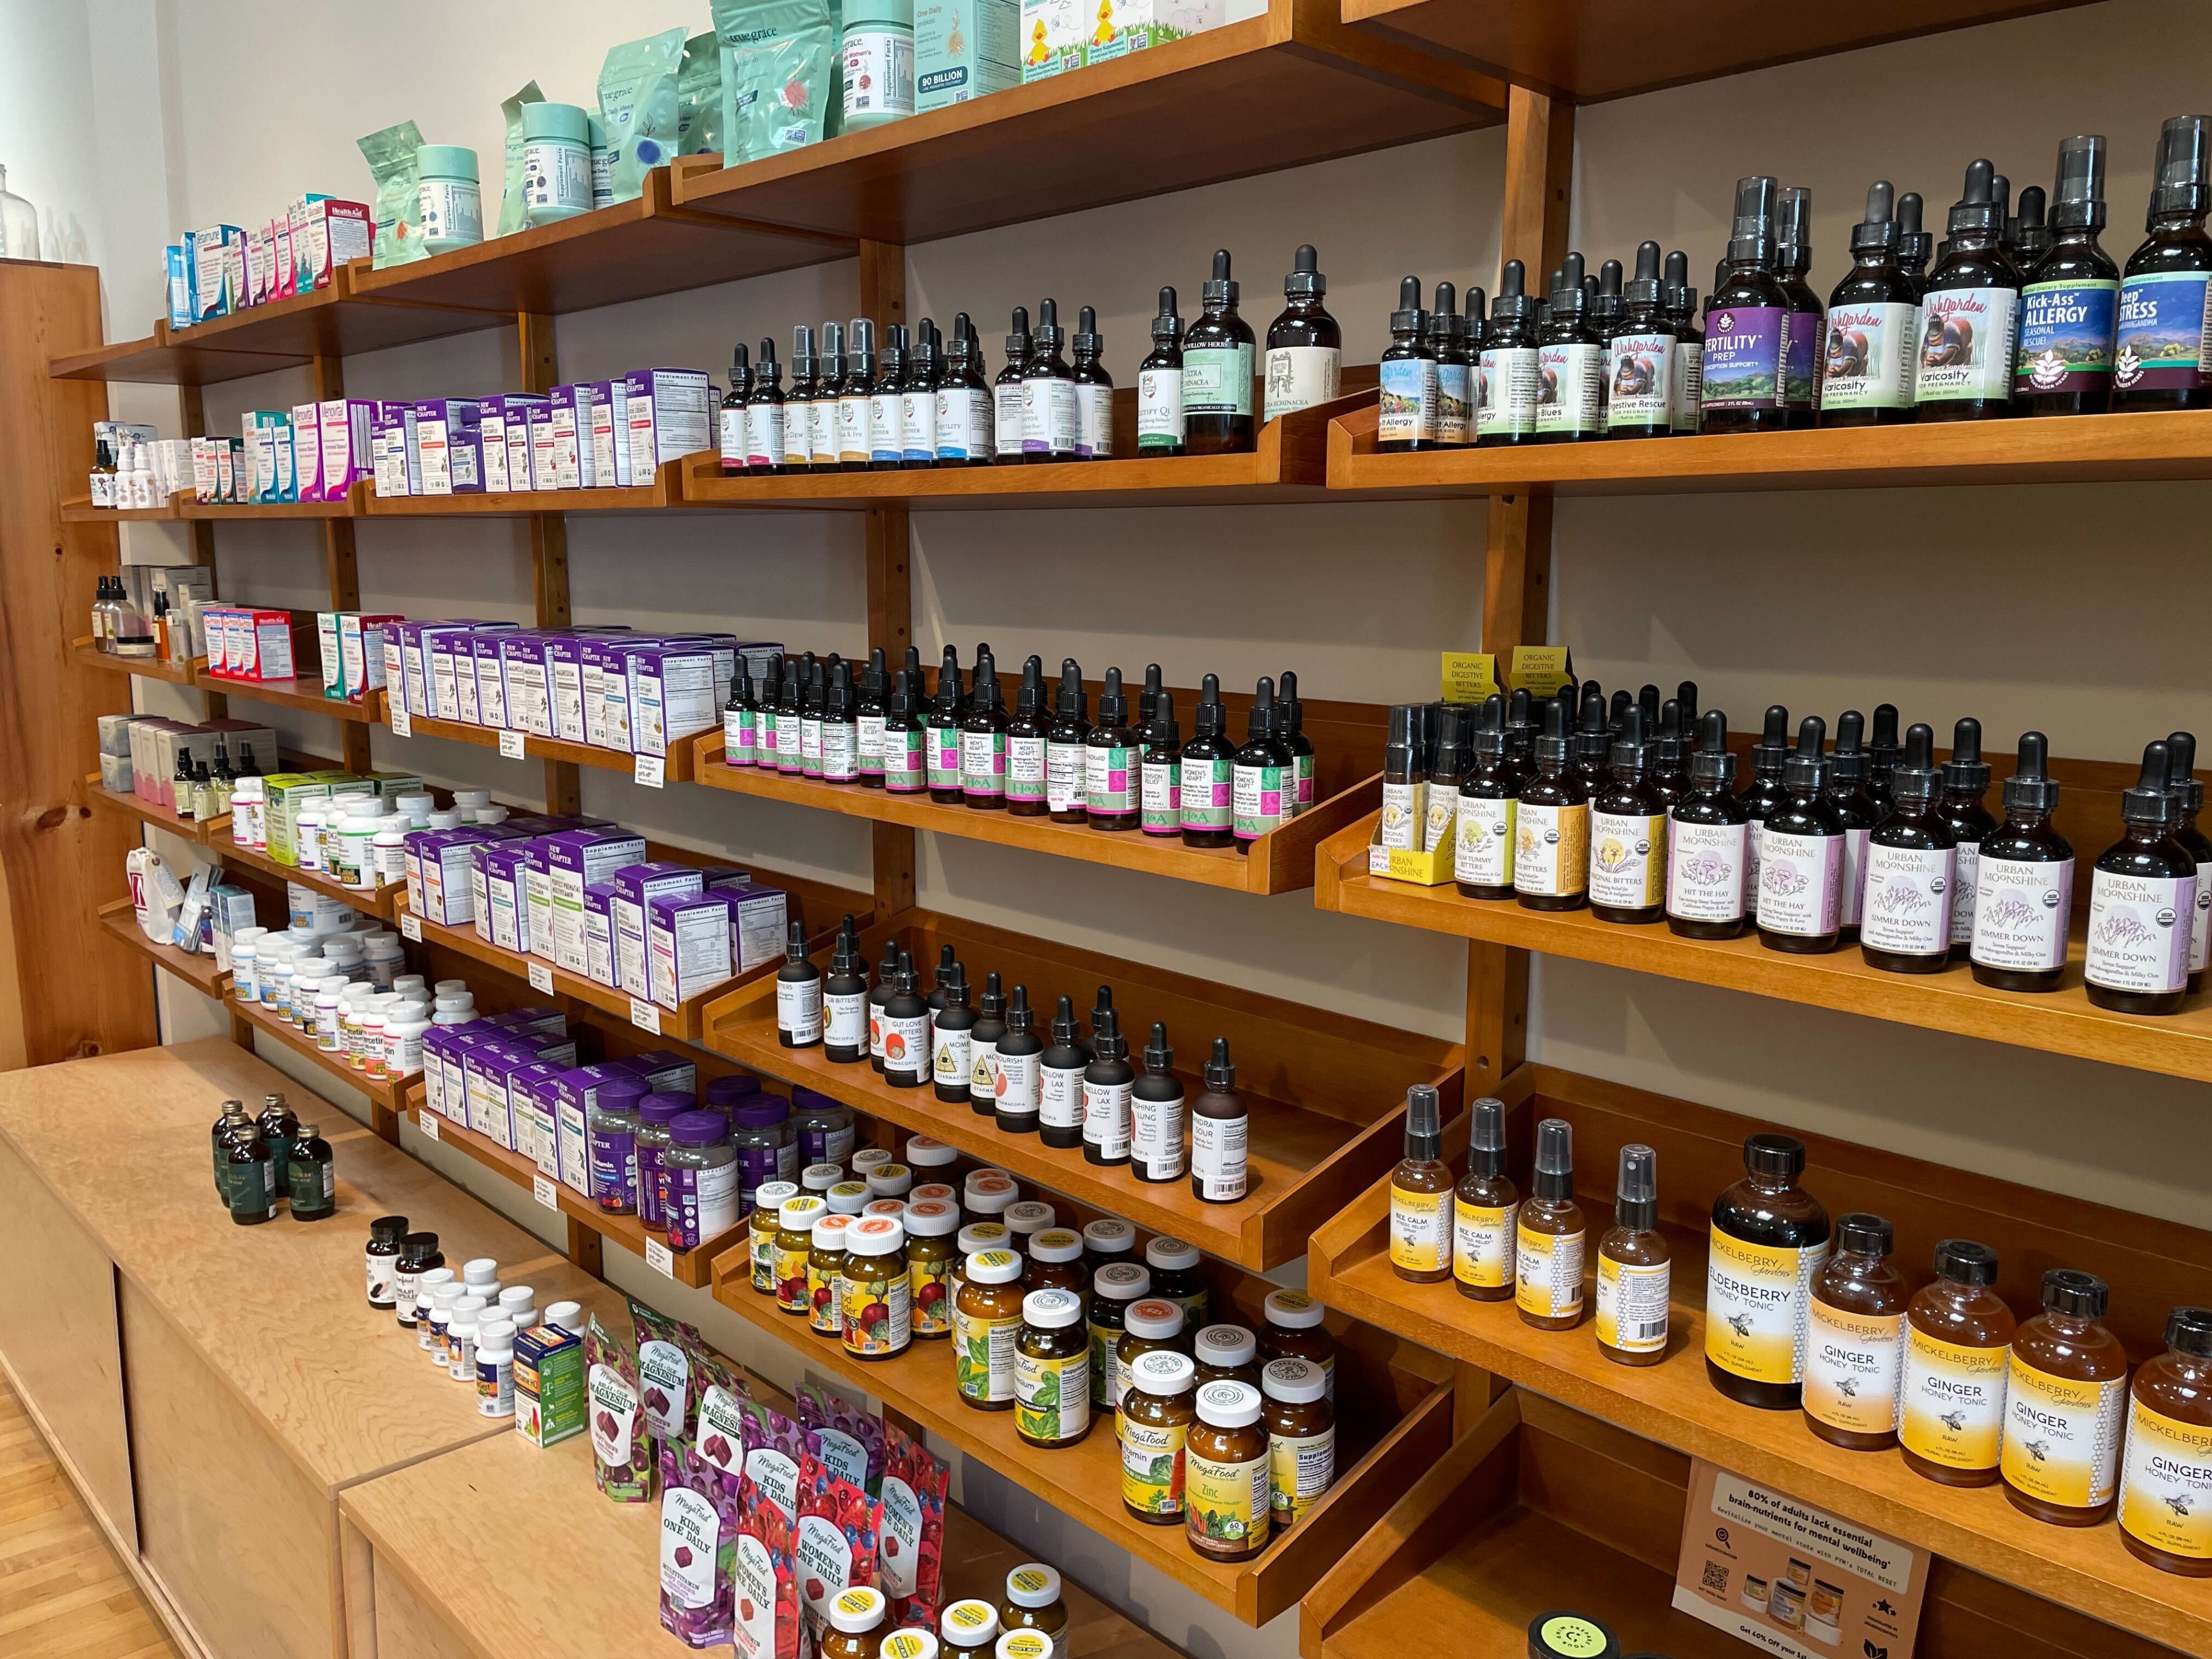 A shelf contains essential oils and vitamin supplements.